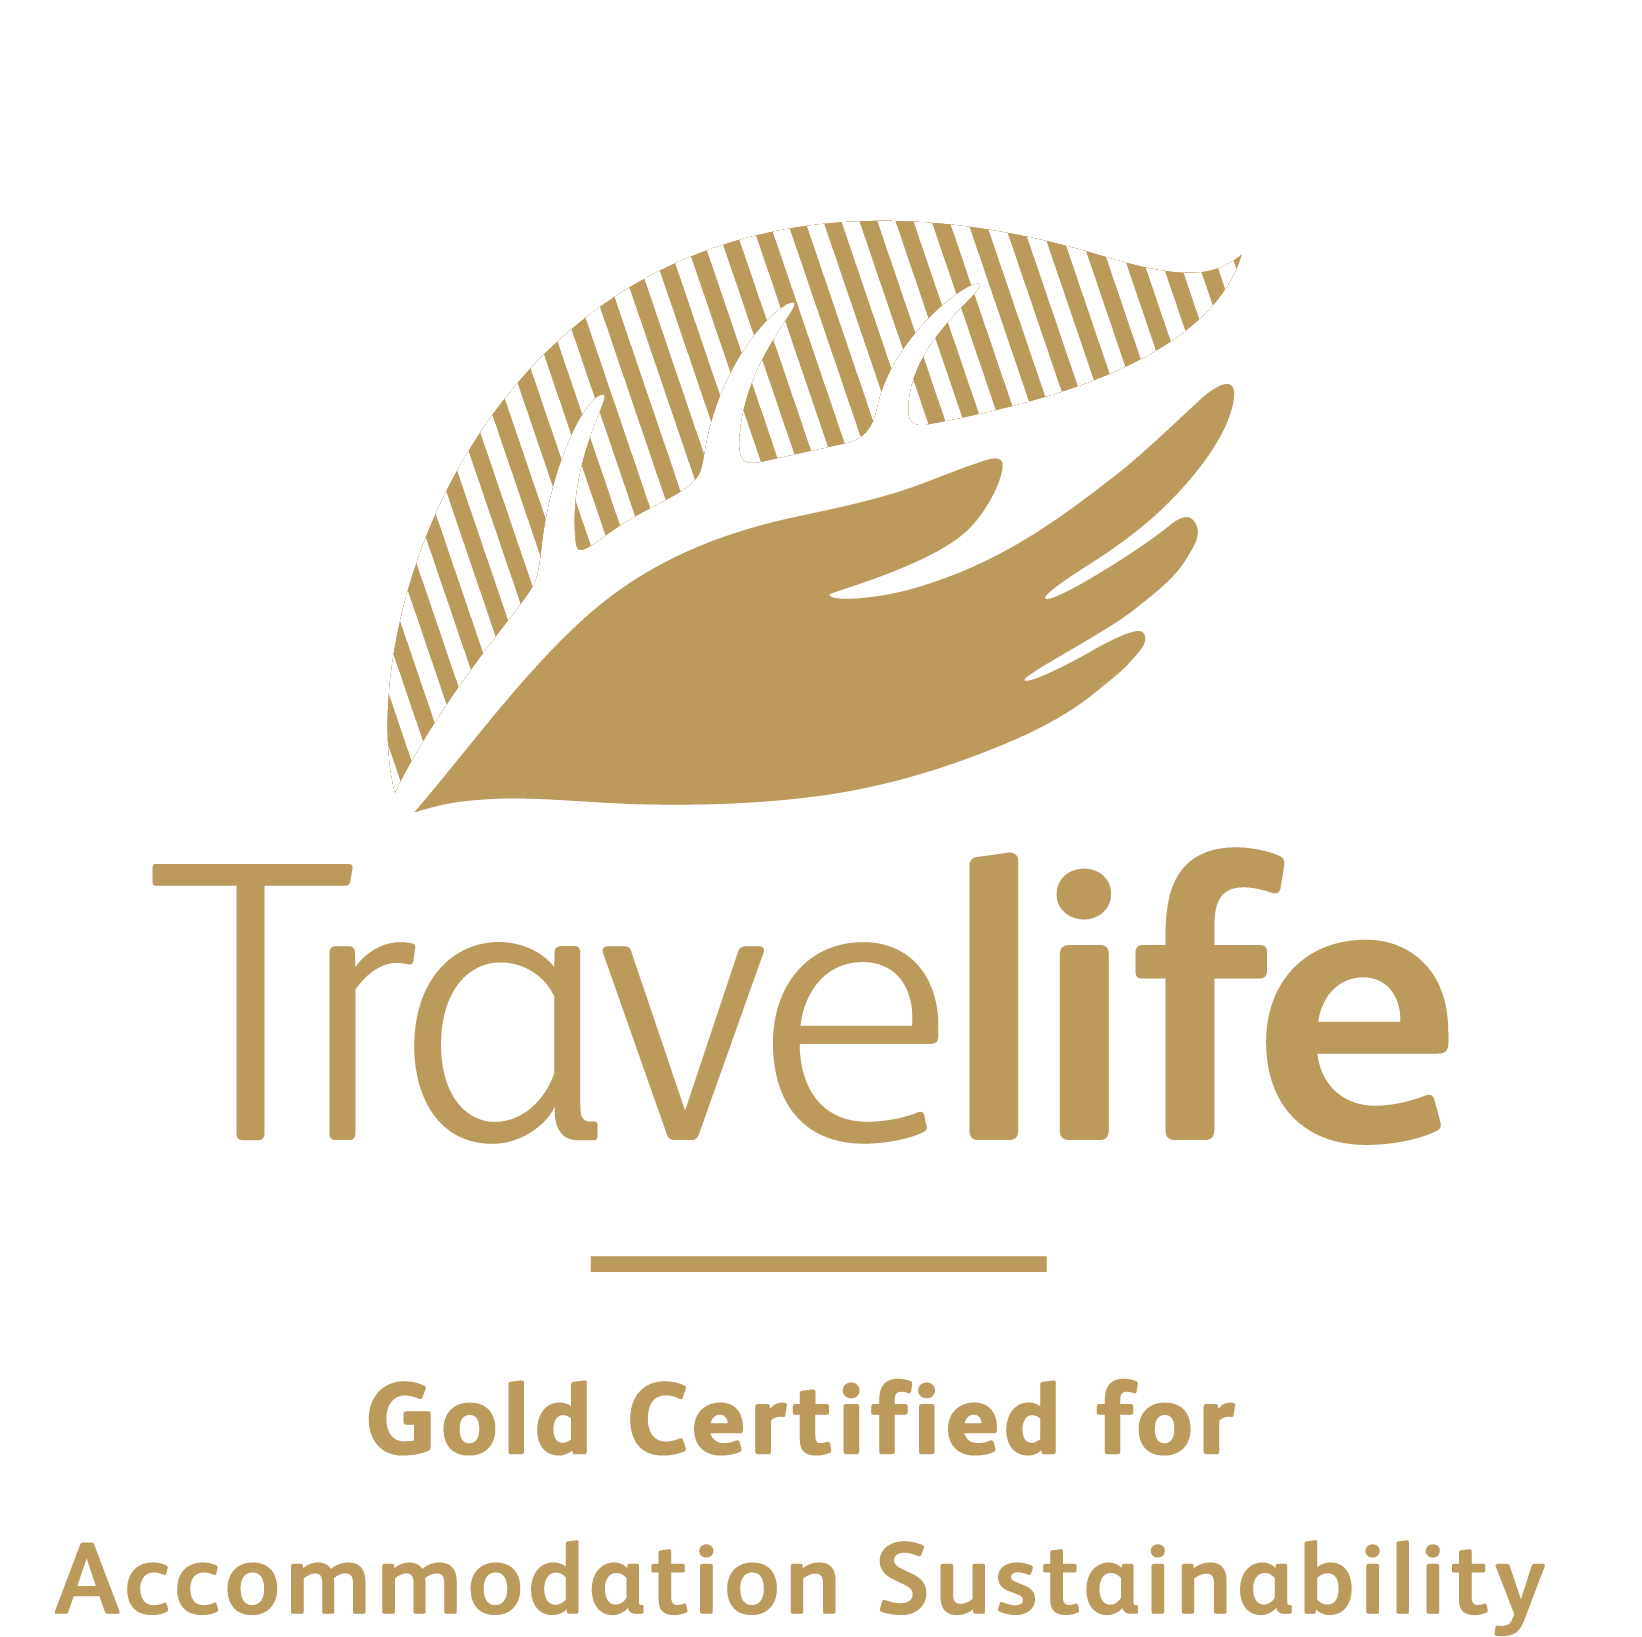 Travelife gold certificate for accommodation sustainability